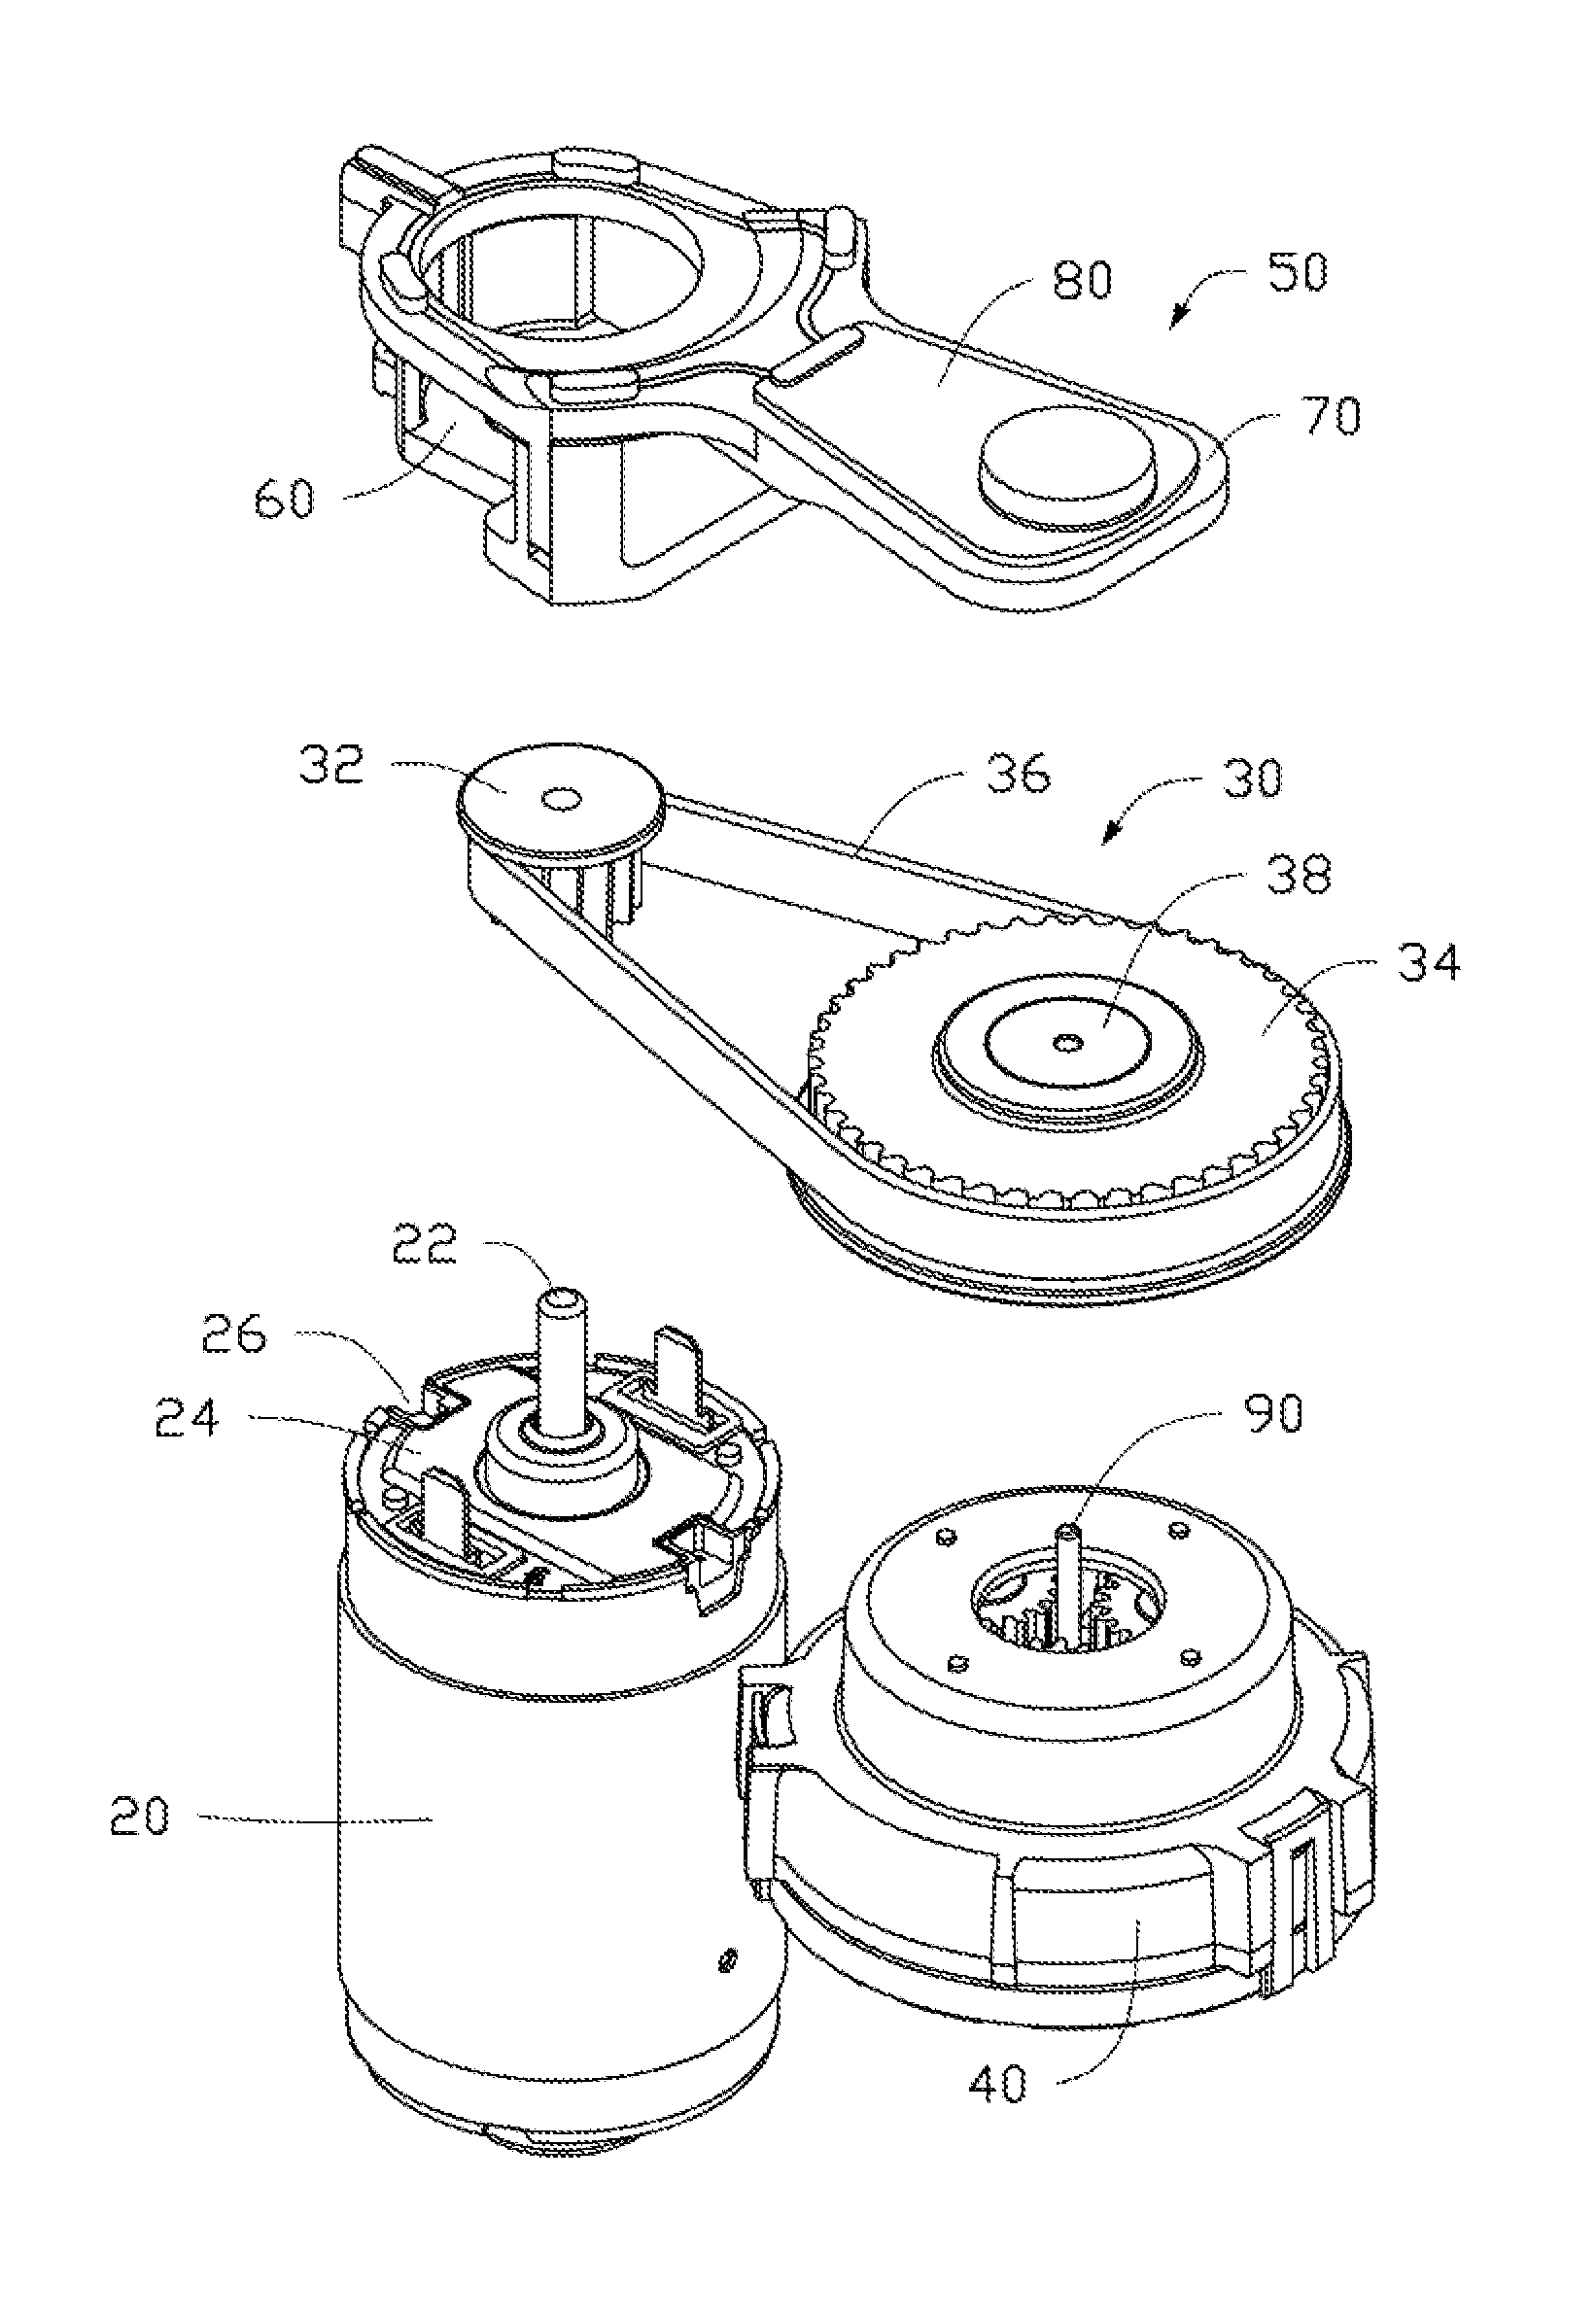 Actuator for an Electric Parking Brake System